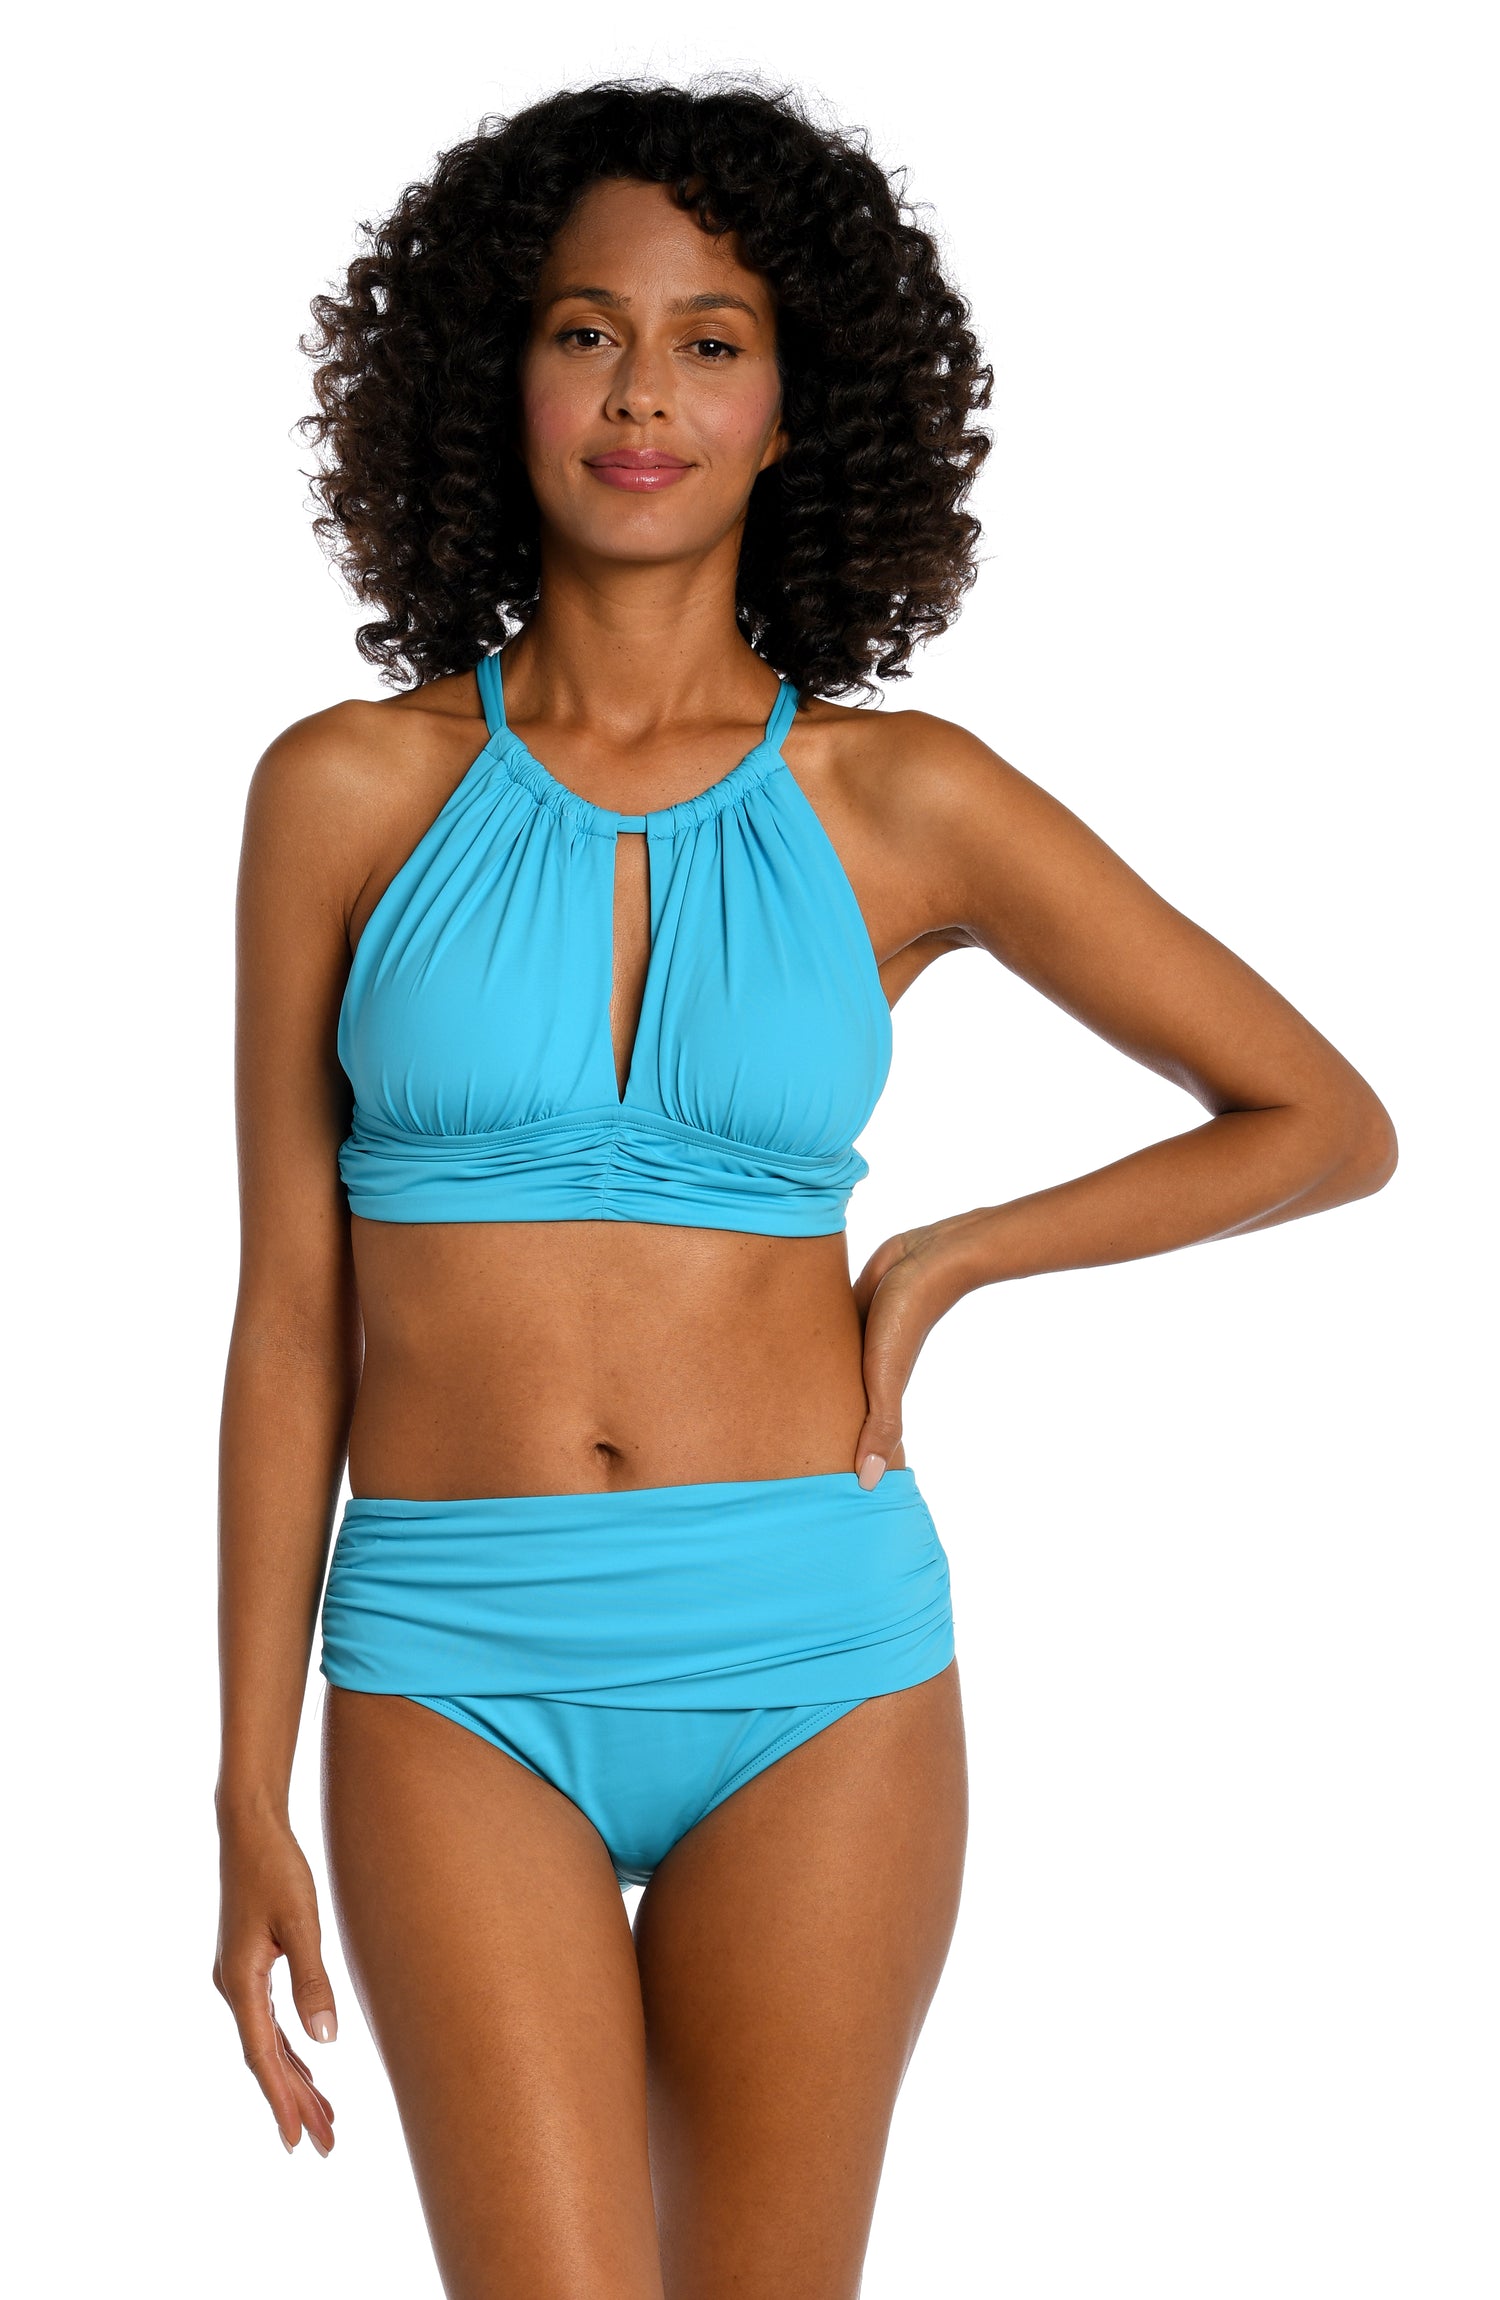 Model is wearing a azul (light blue) colored midkini swimsuit top from our Best-Selling Island Goddess collection.